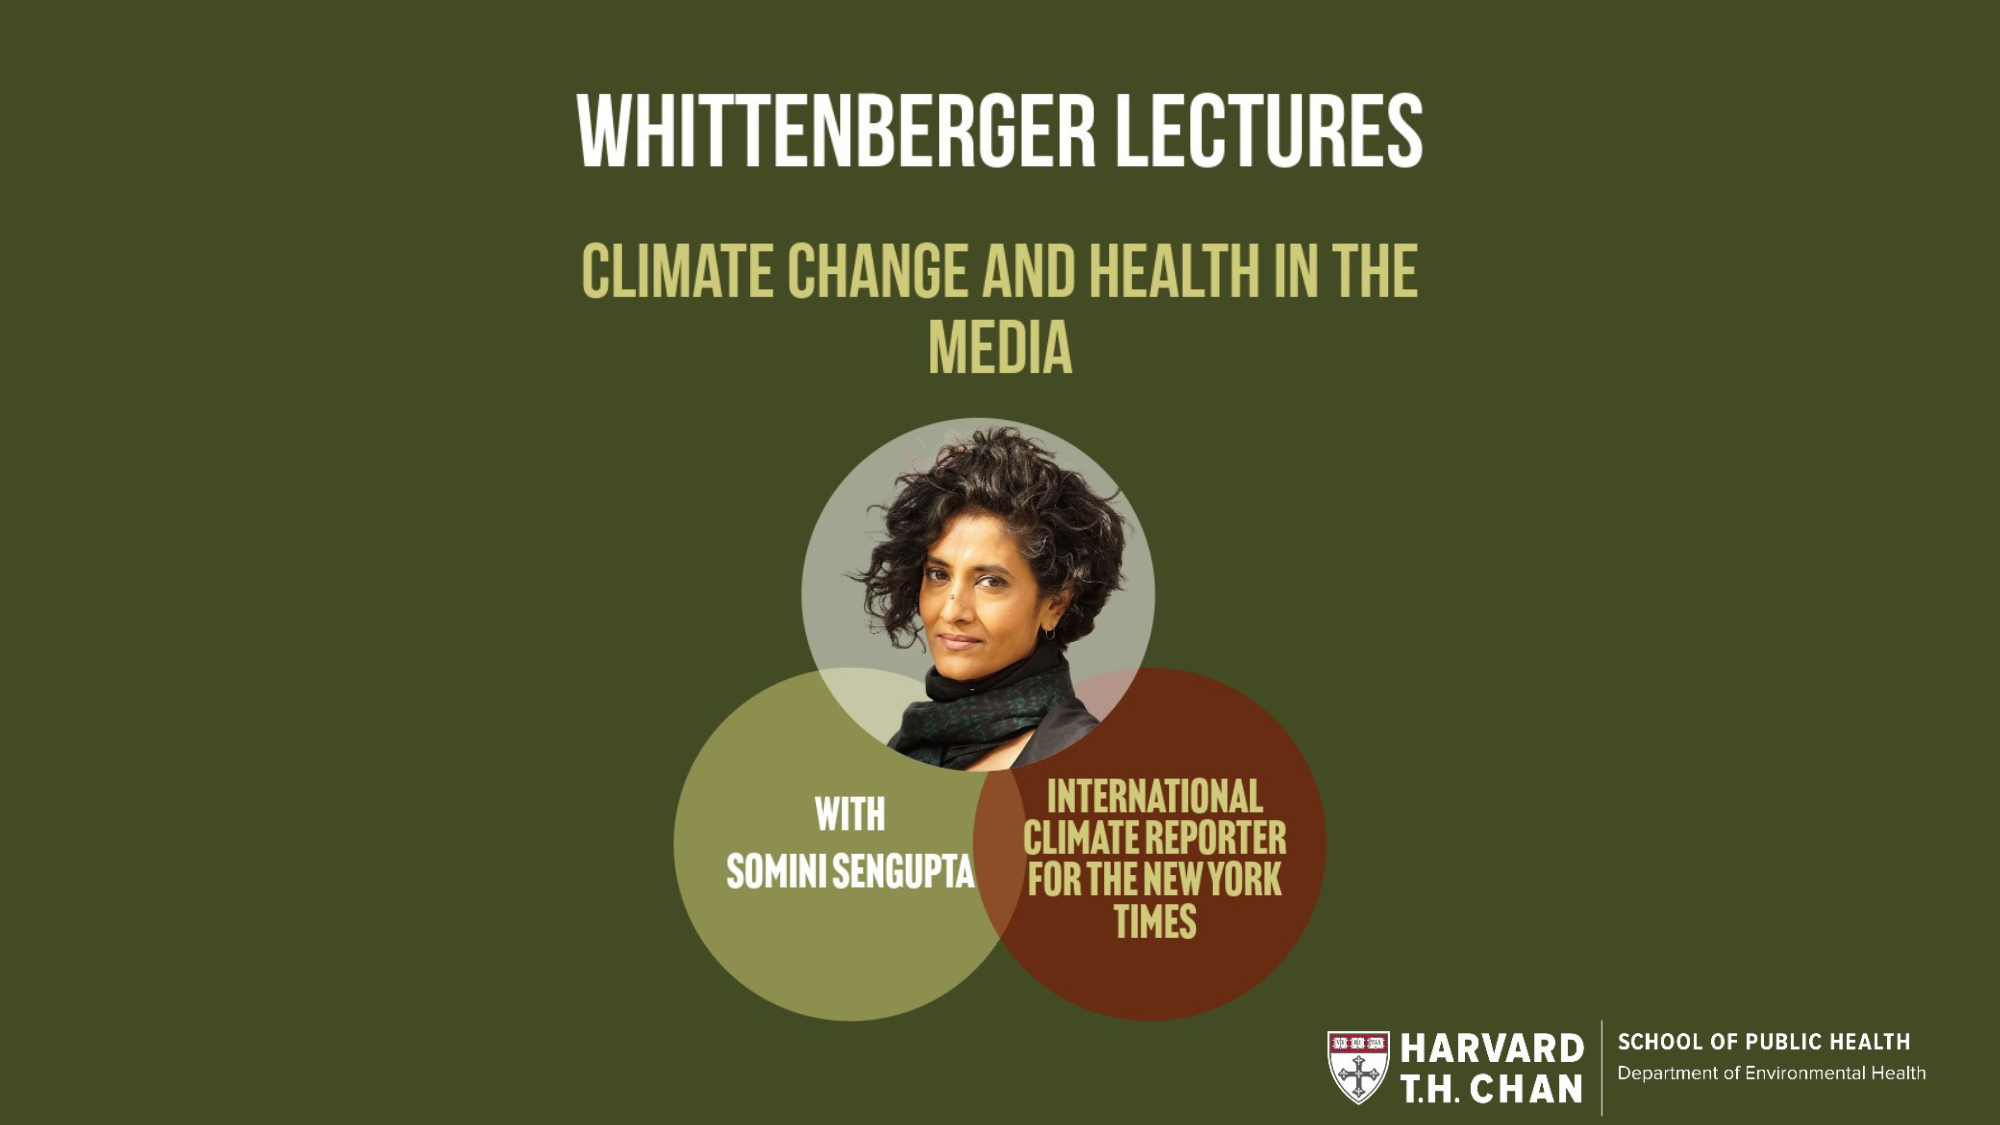 Graphic that has a photo of Somini Sengupta with text "Whittenberger Lectures: Climate Change and health in the media with Somini Sengupta, International Climate Reporter for the NYT" with the lecture date, Friday, Sept. 29 from 4-5 pm at Kresge 202. The TH Chan School of Public Health logo is at the bottom.